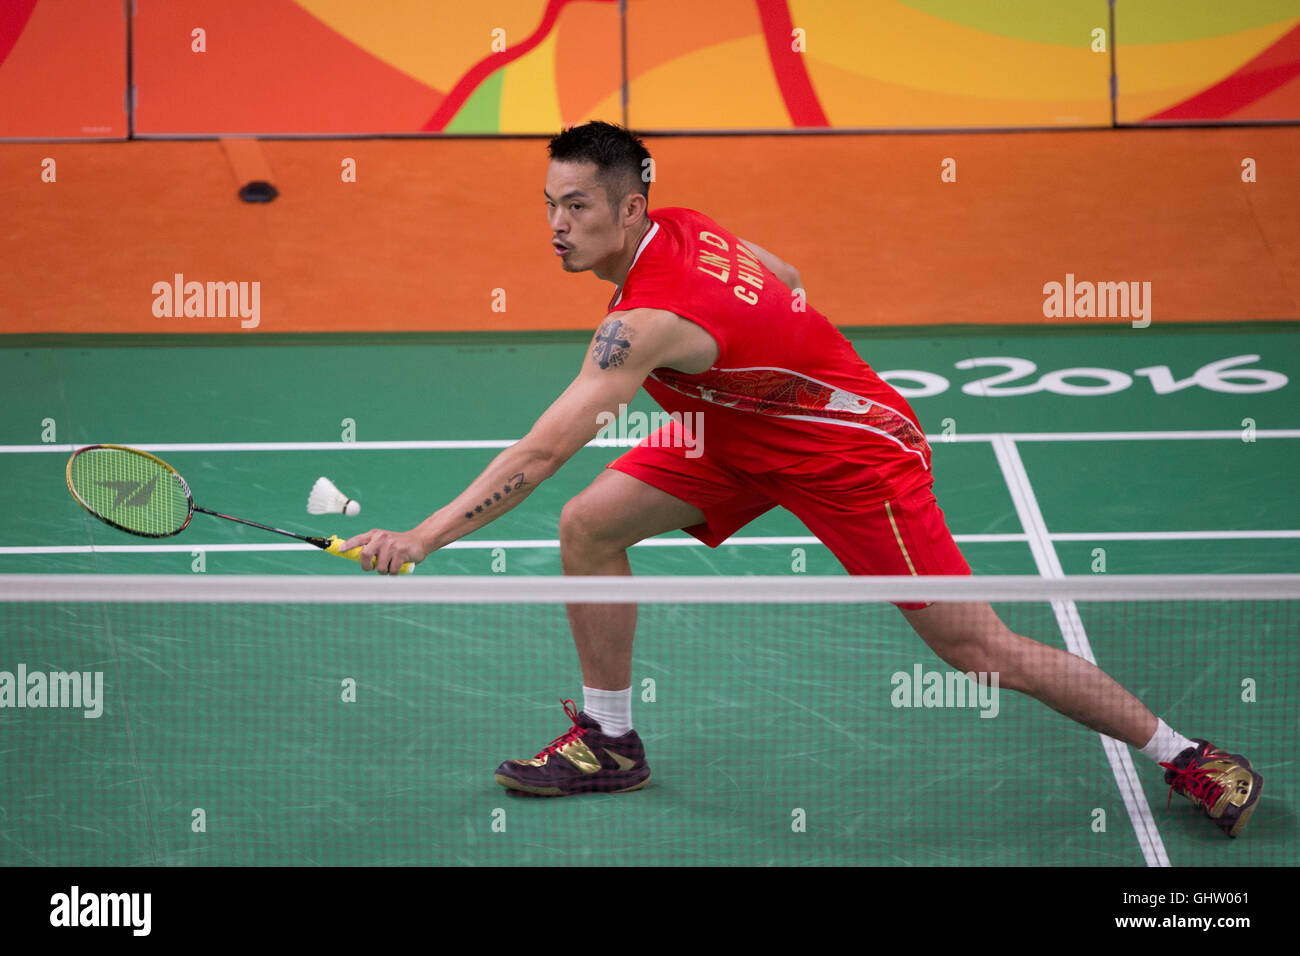 Rio de Janeiro, Brazil. 11th August, 2016. Match between LIN Dan (CHN) and Obernosterer D. (AUT) during the Badminton 2016 Olympics held in Hall 4 Riocentro. NOT AVAILABLE FOR LICENSING IN CHINA (Photo: Celso Pupo/Fotoarena) Credit:  Foto Arena LTDA/Alamy Live News Stock Photo